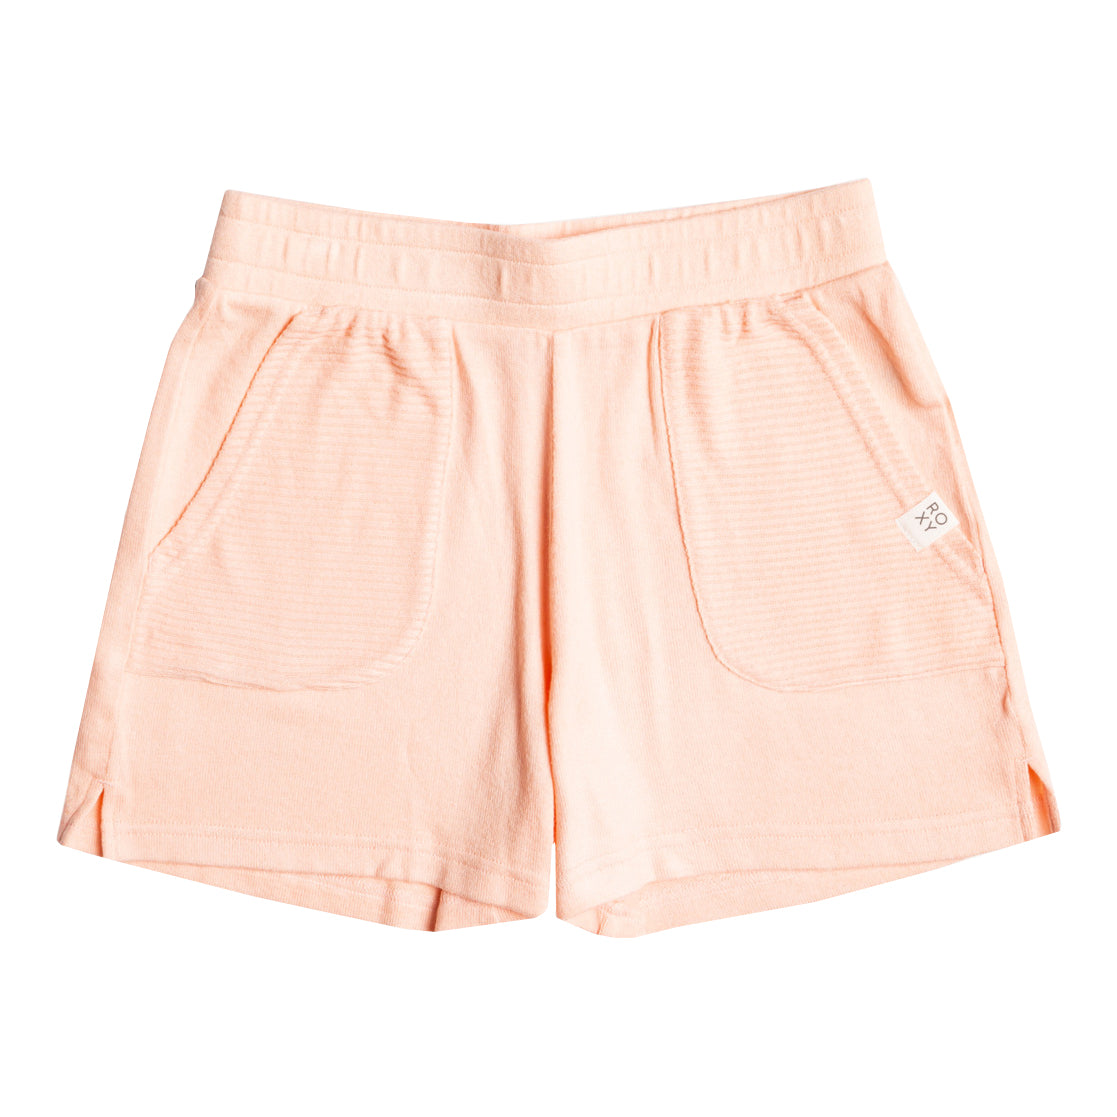 Roxy All The Little Lights Shorts MDR0 12/L